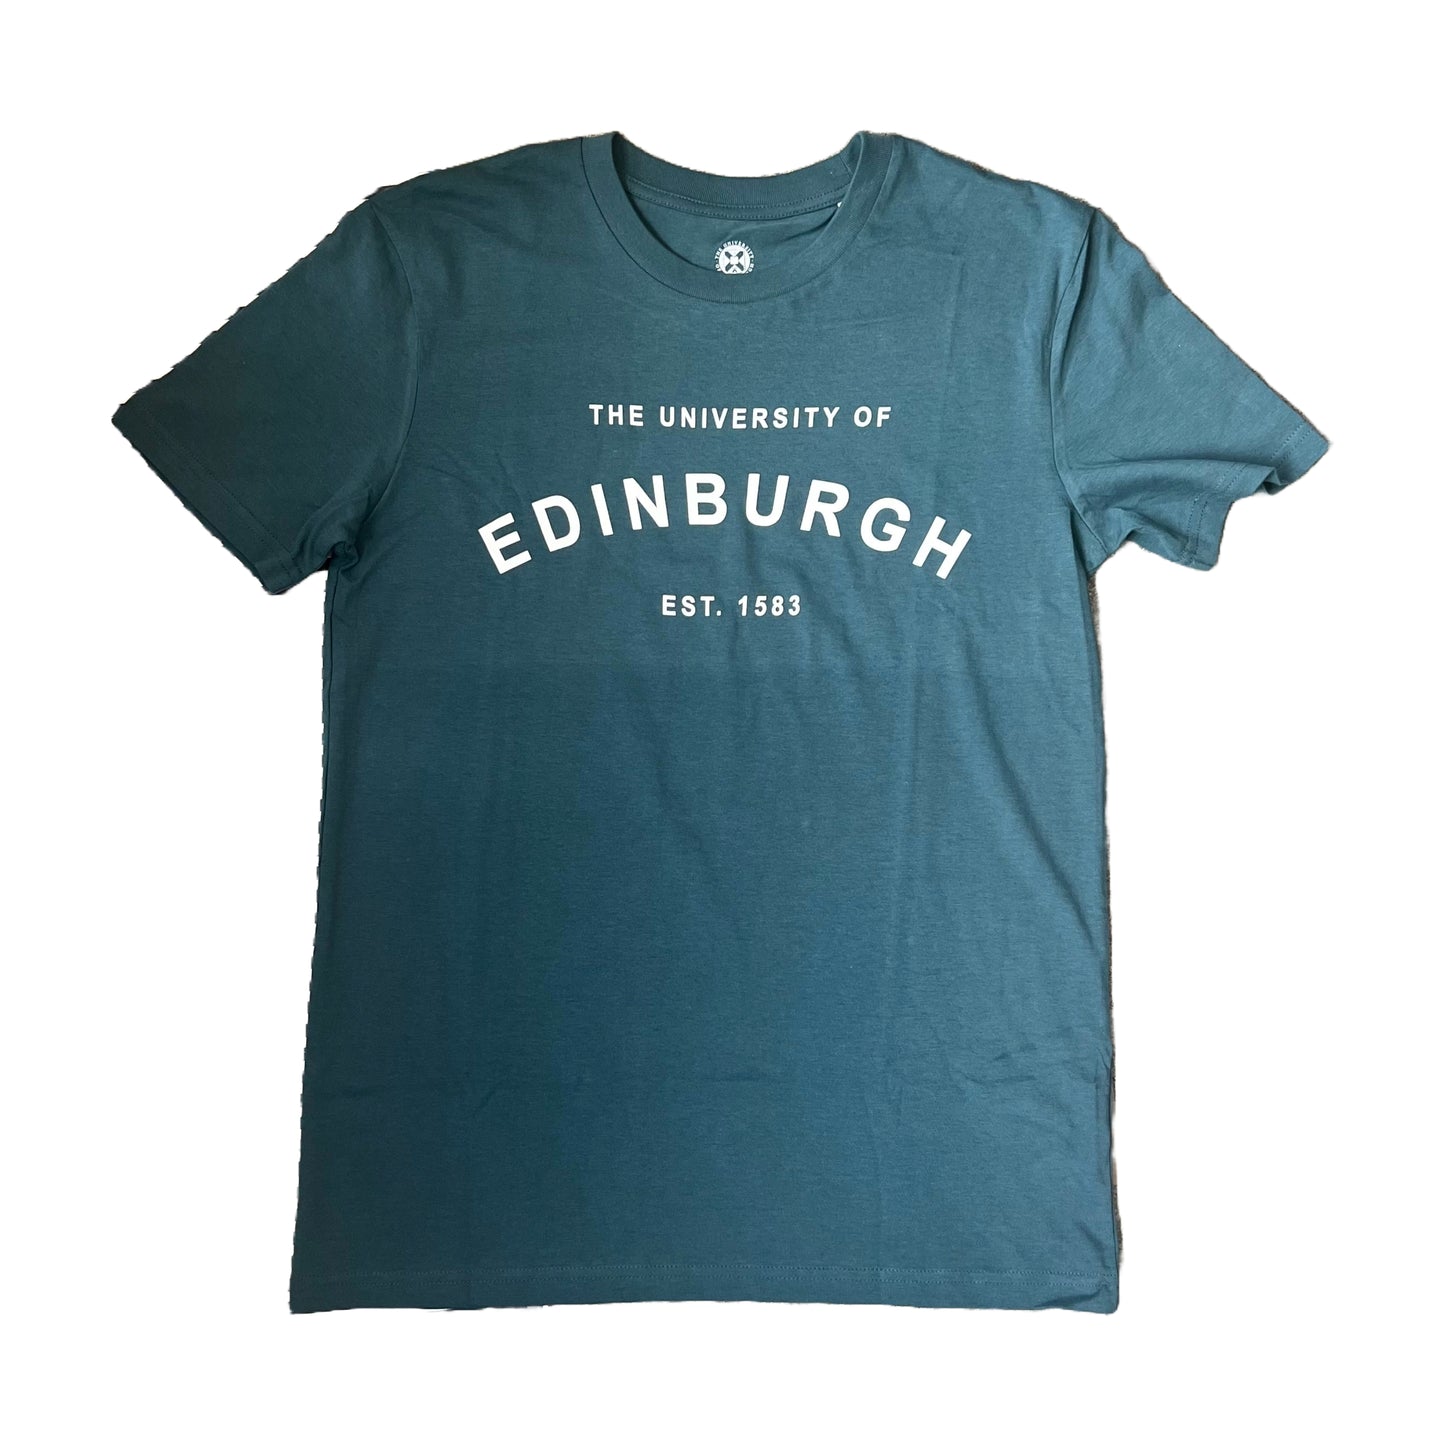 Established design unisex t-shirt in teal with white writing.